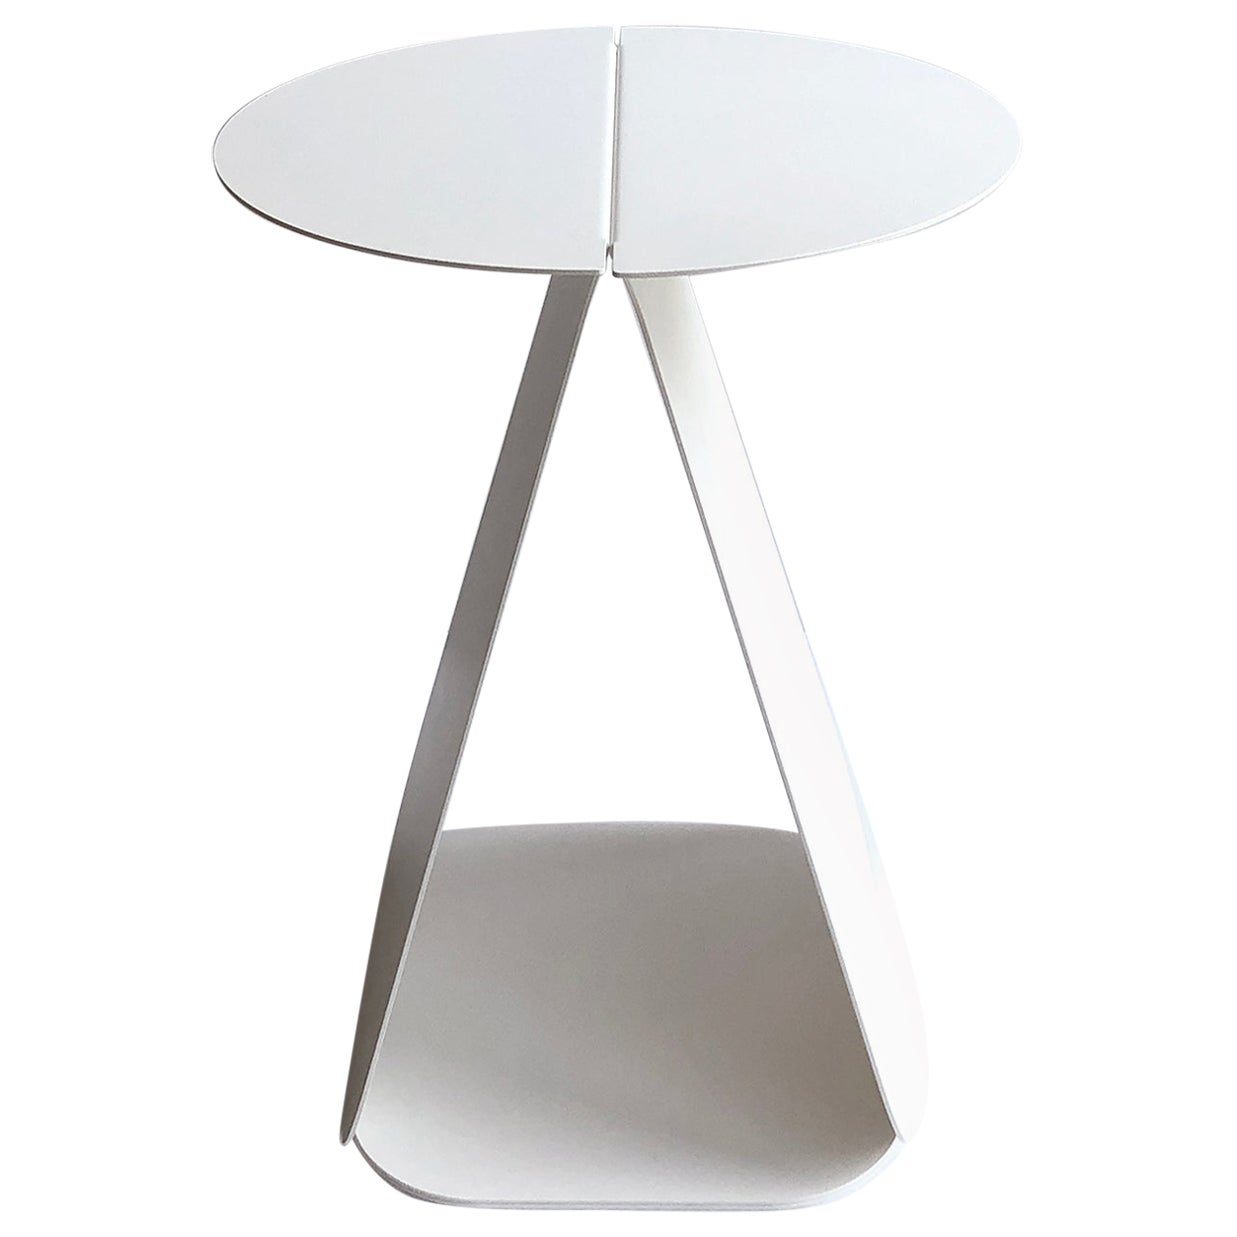 Table d'appoint ronde blanche YOUMY de Mademoiselle Jo